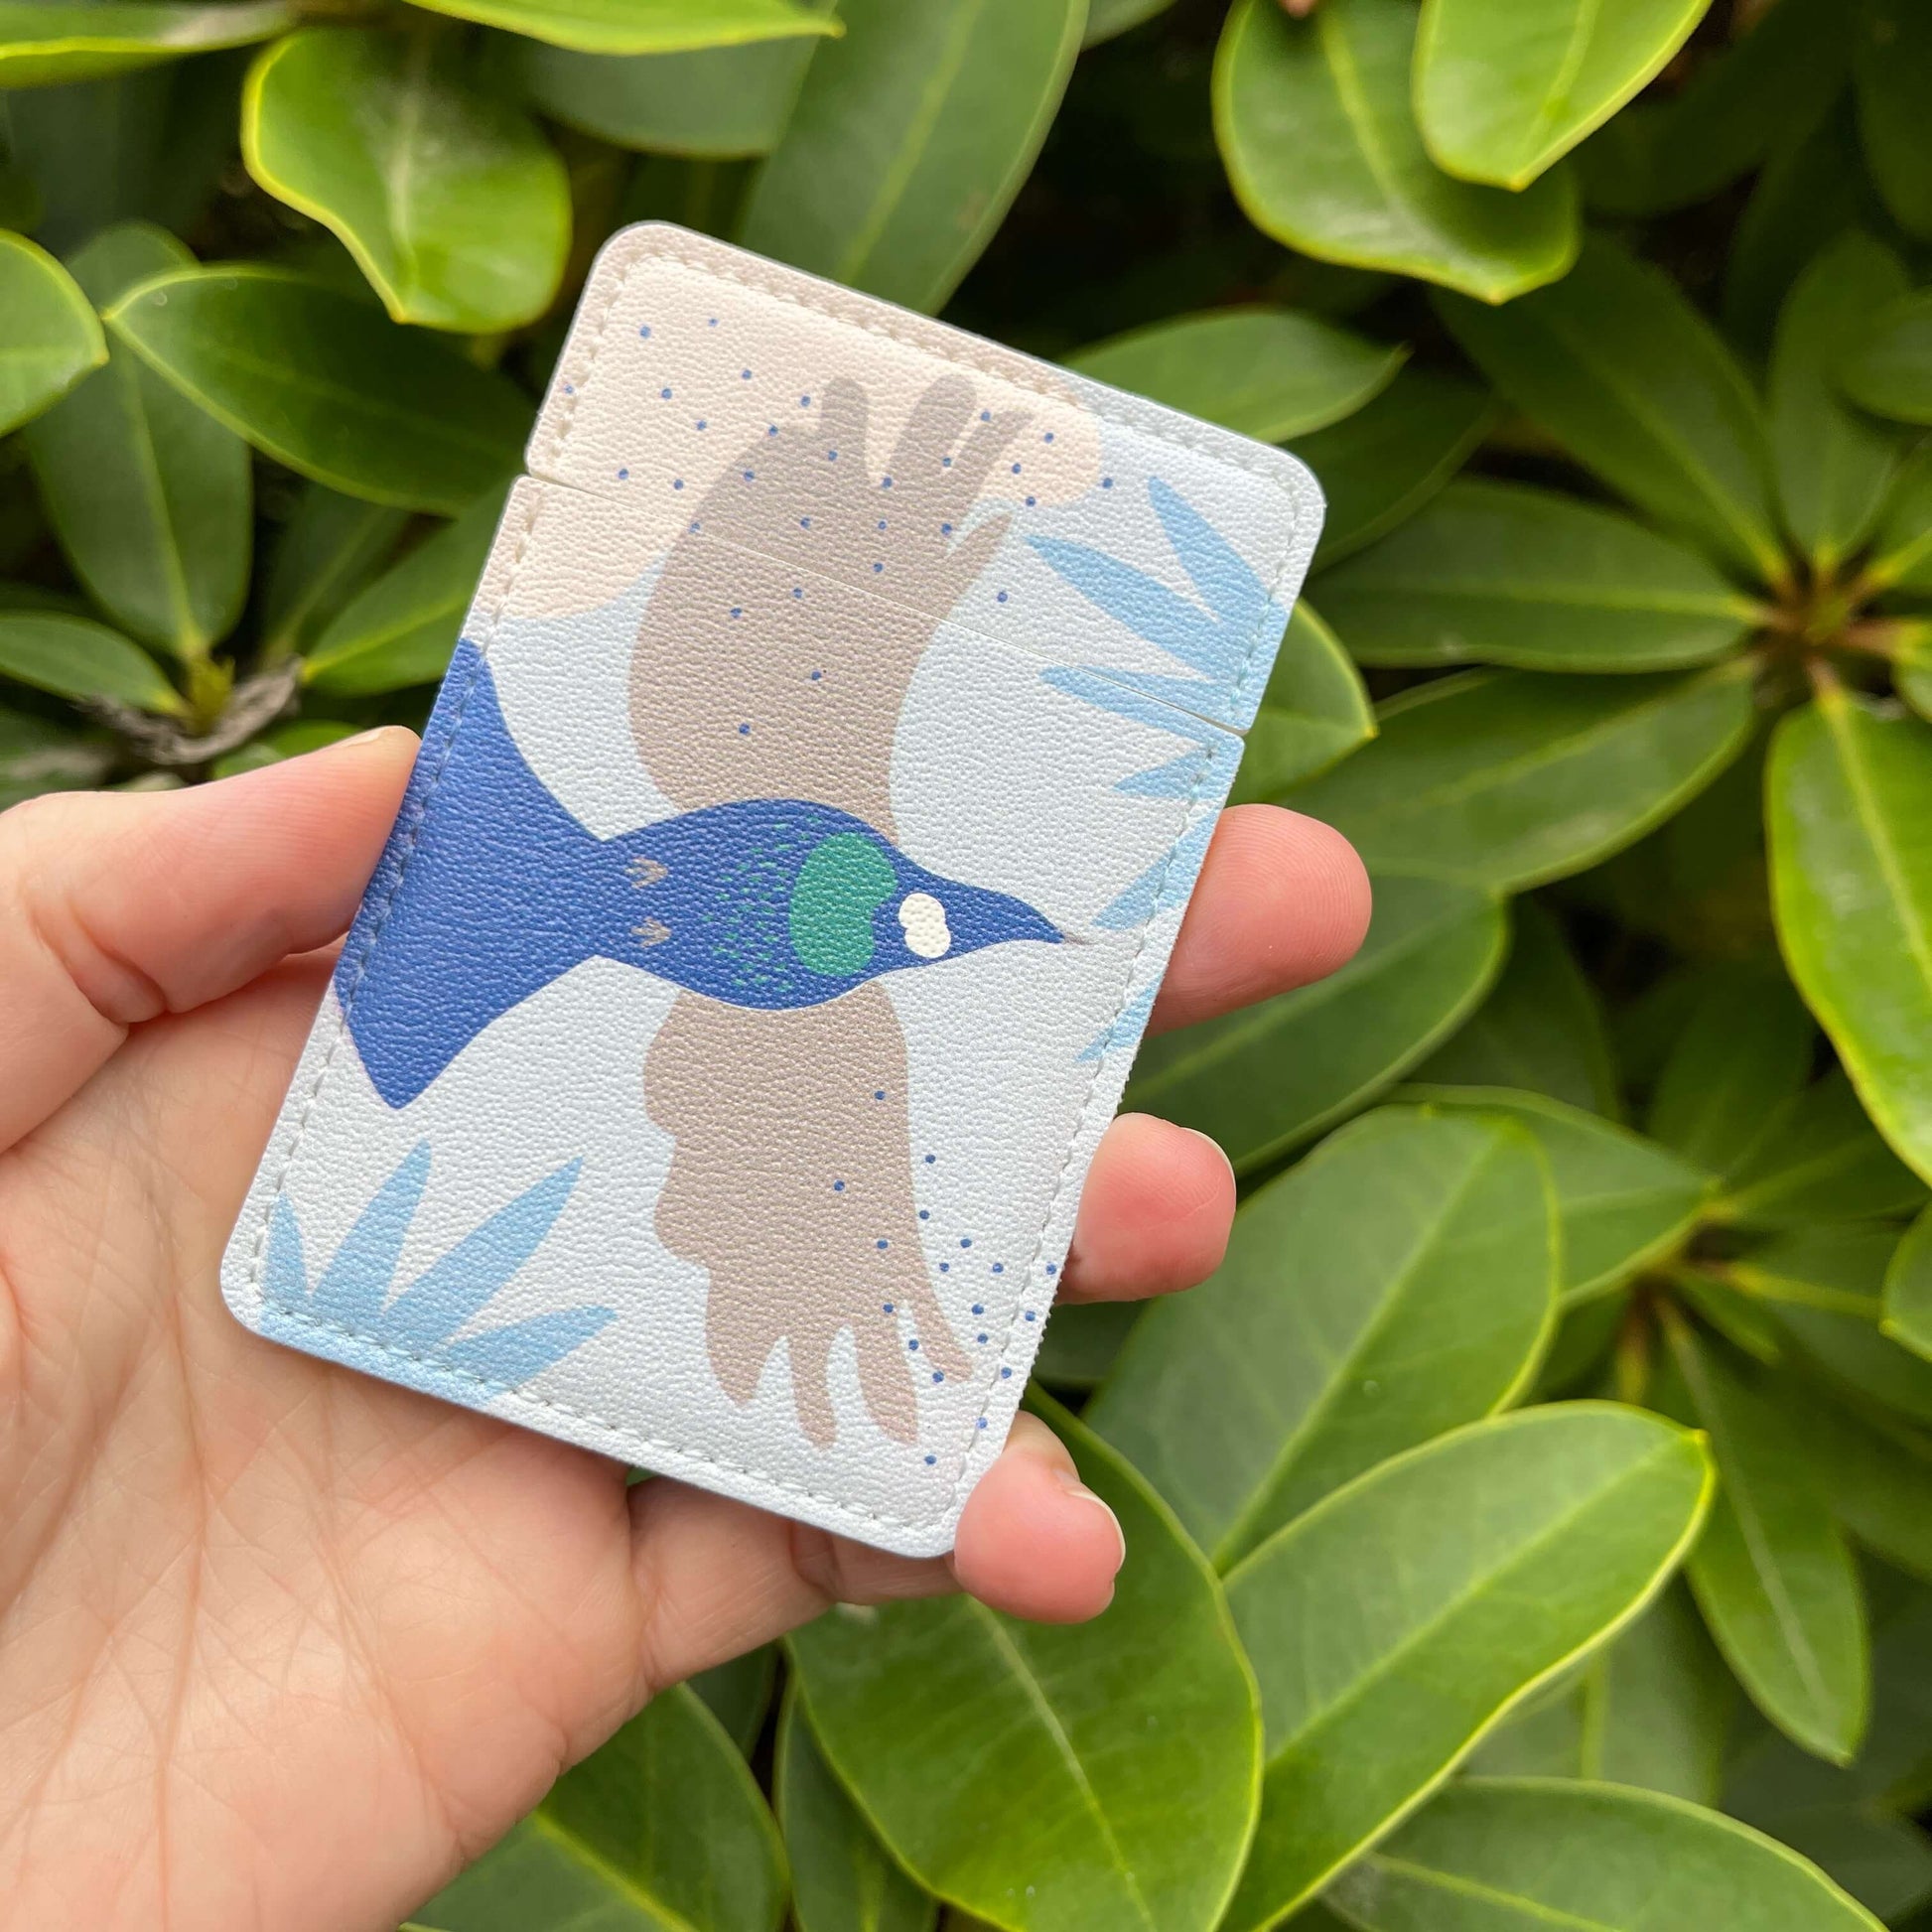 Pocket Mirror - Cut-out Tui with blue and grey accents.